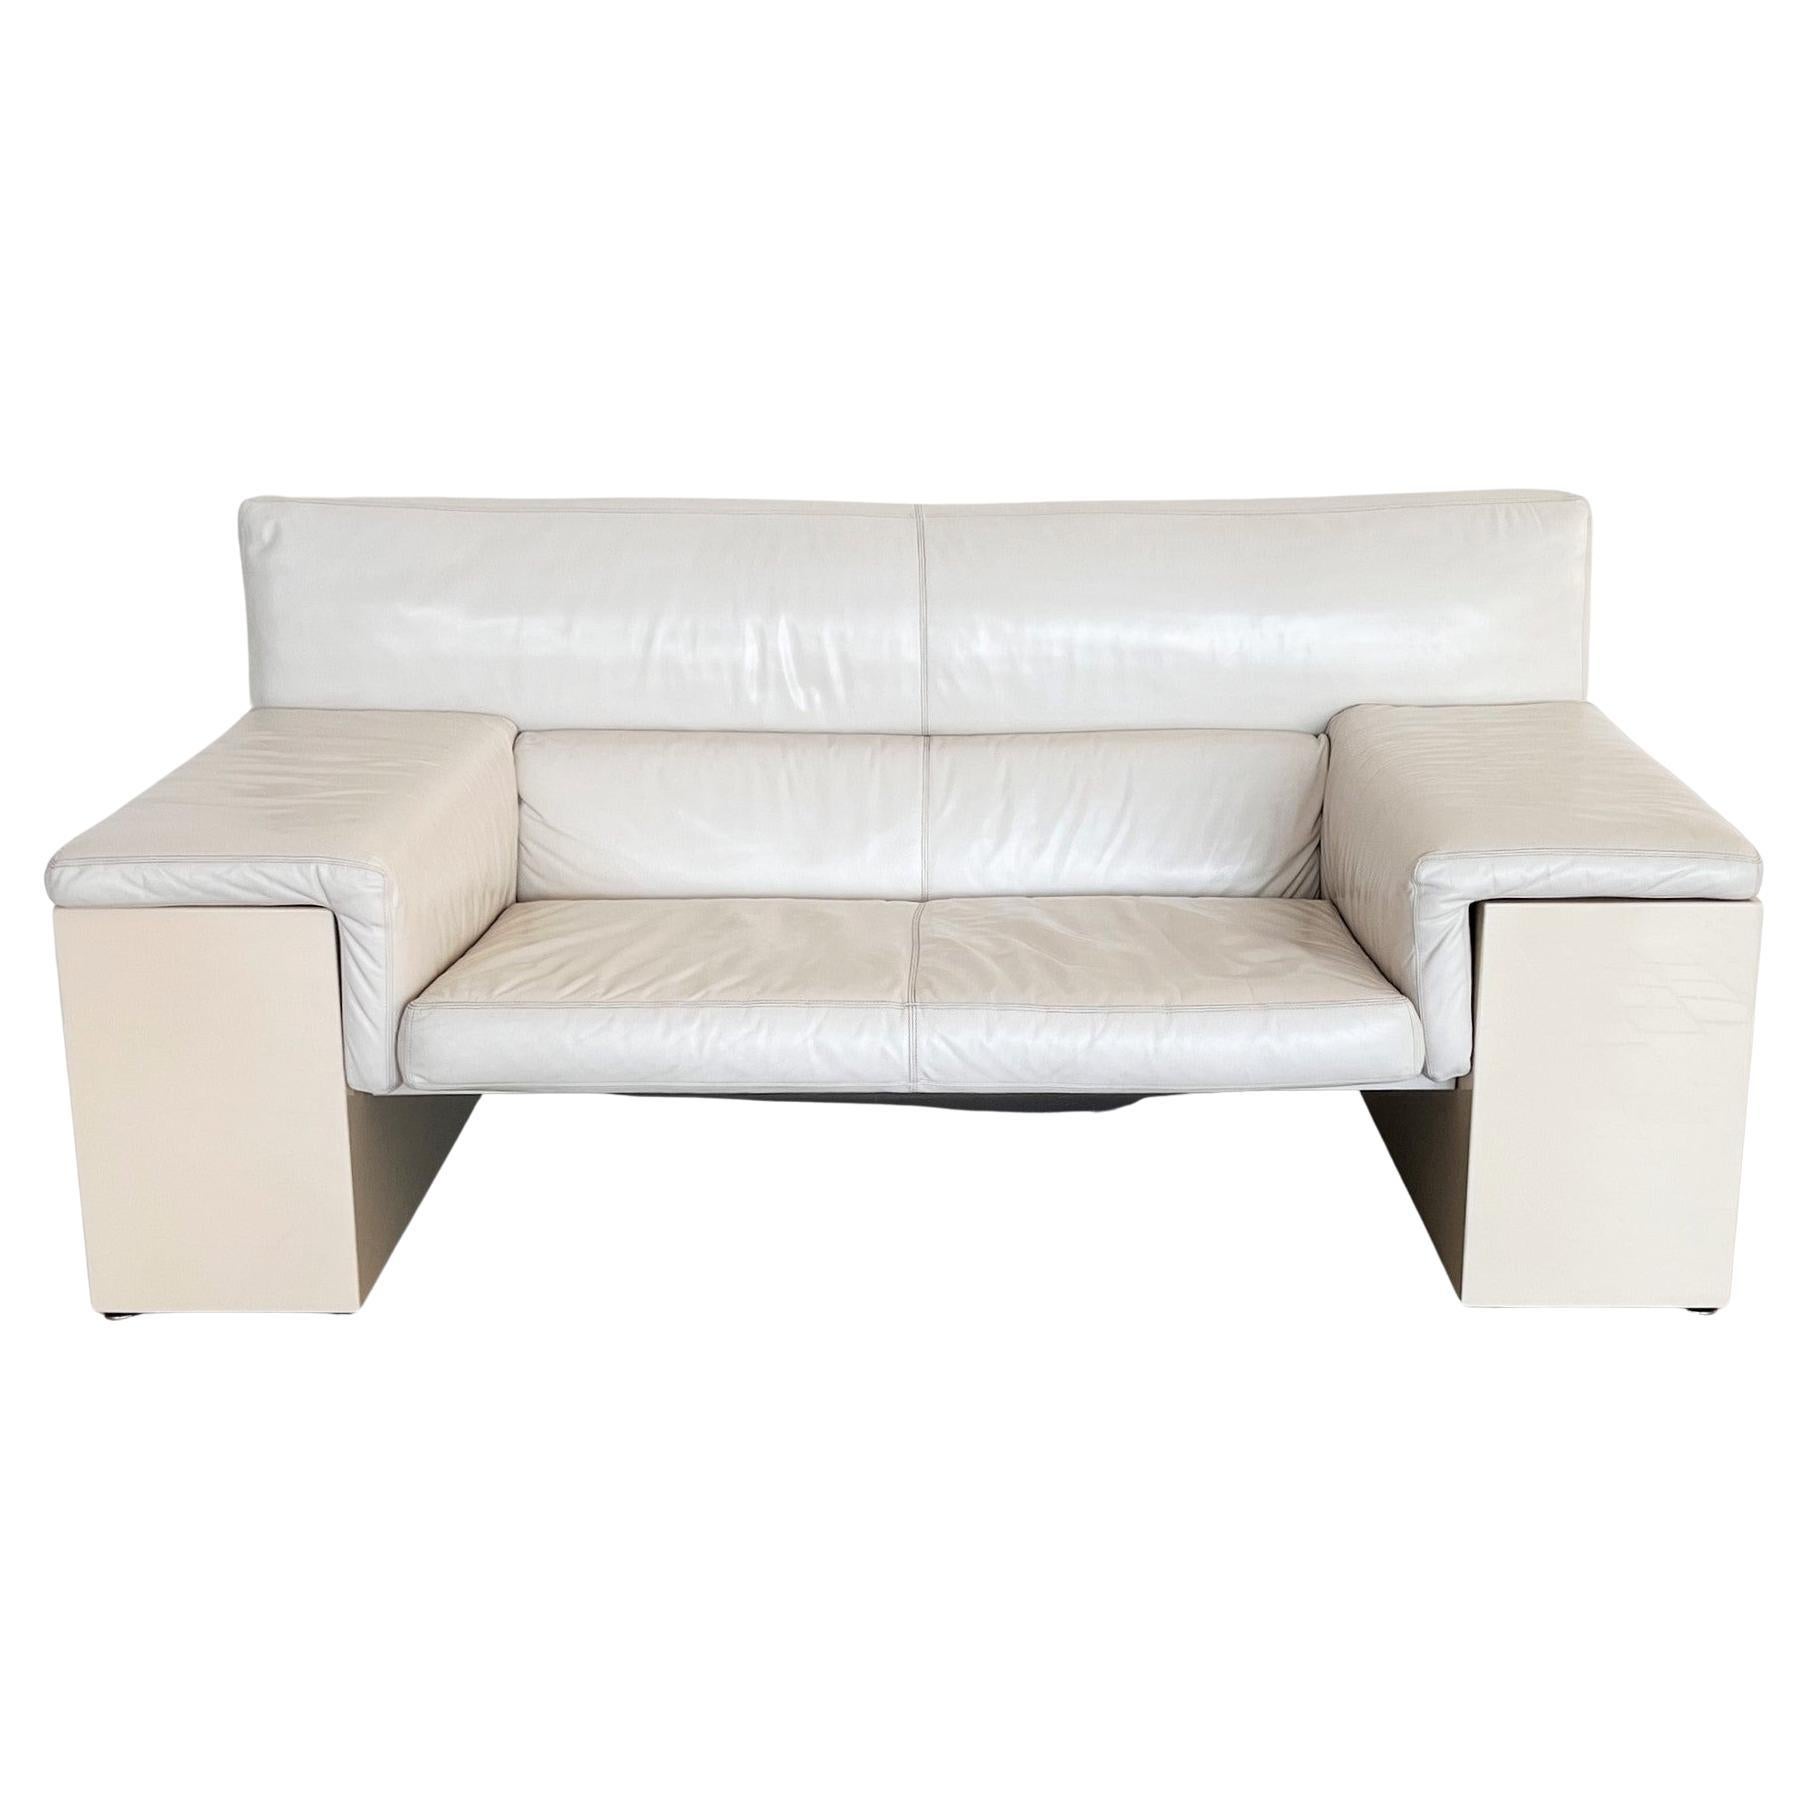 Cini Boeri for Knoll Two Seater Sofa 'Brigadier' in White Leather, 1970s